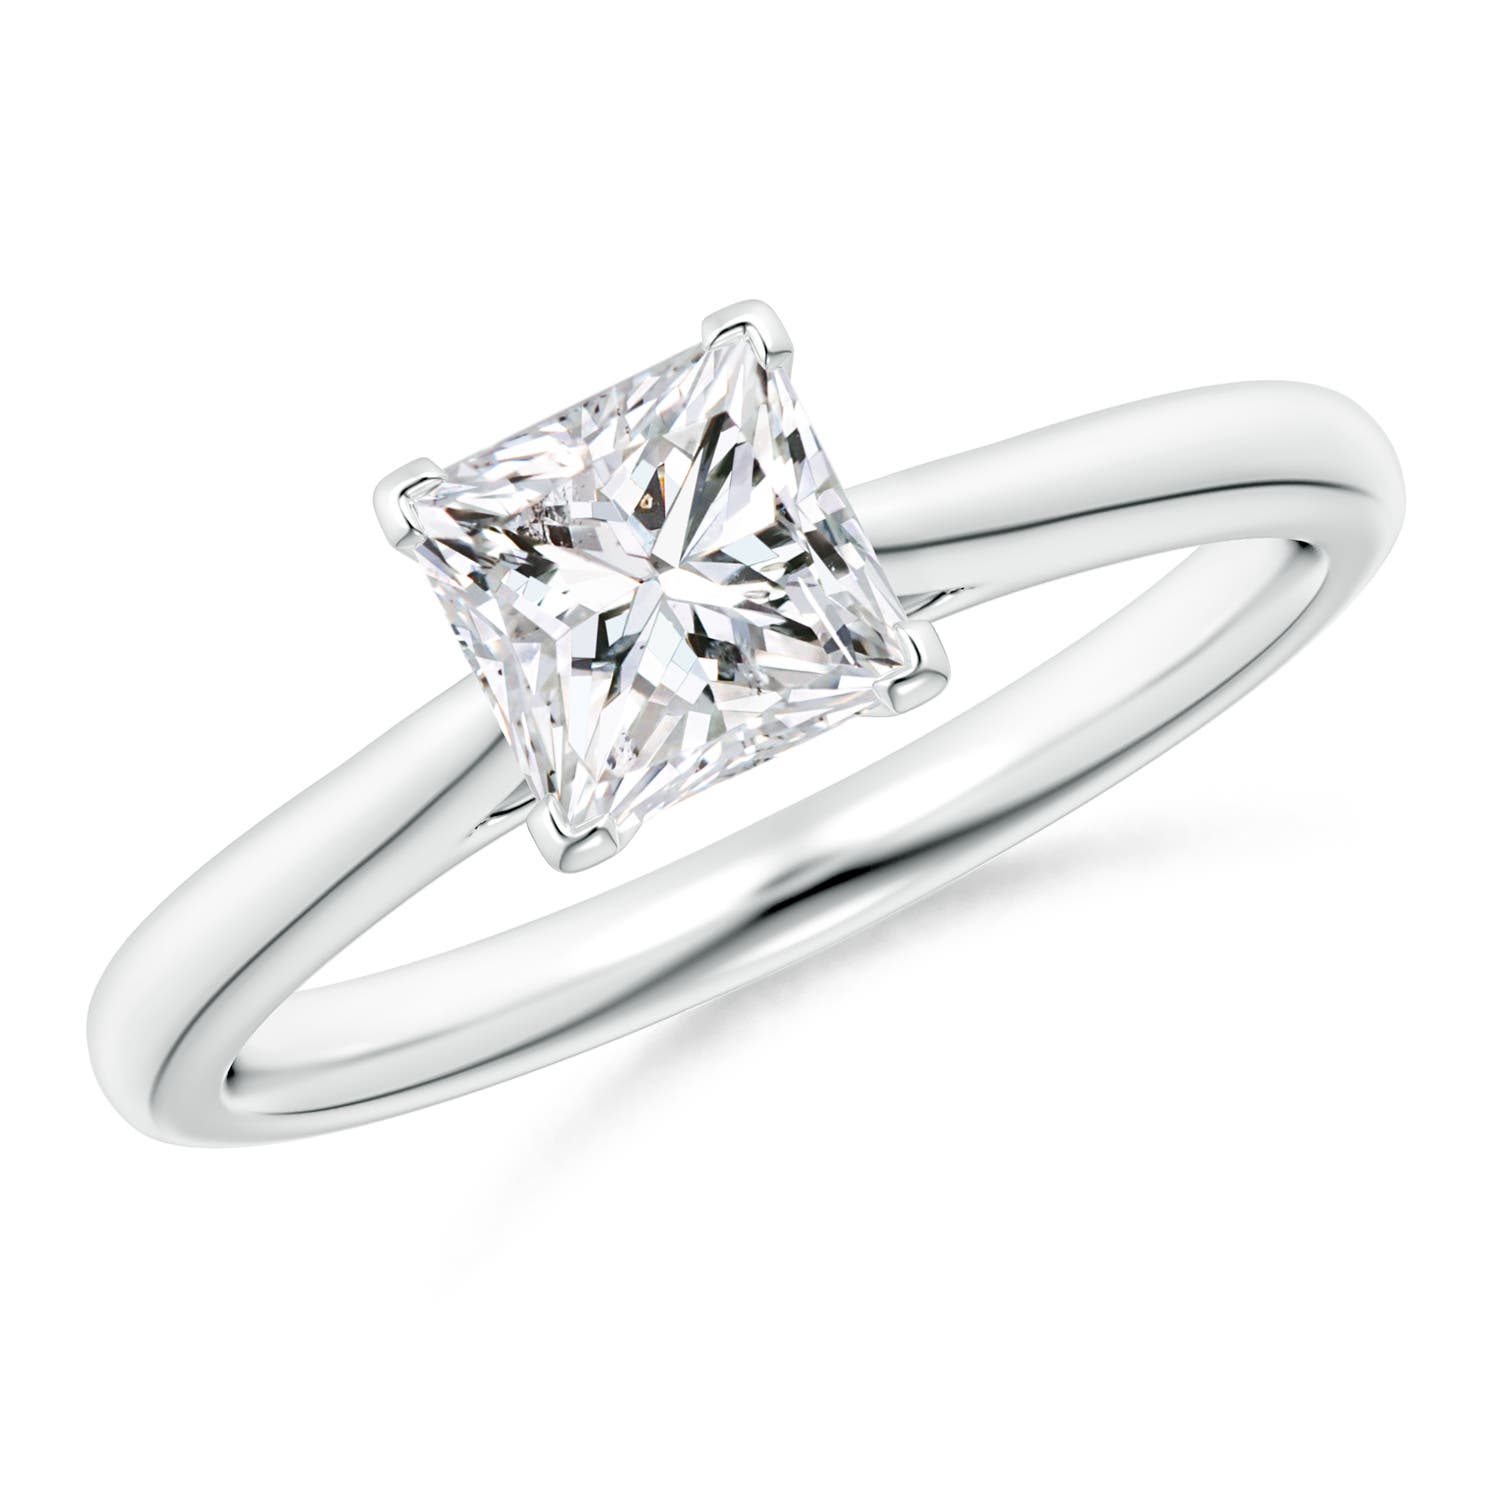 H, SI2 / 1.05 CT / 14 KT White Gold